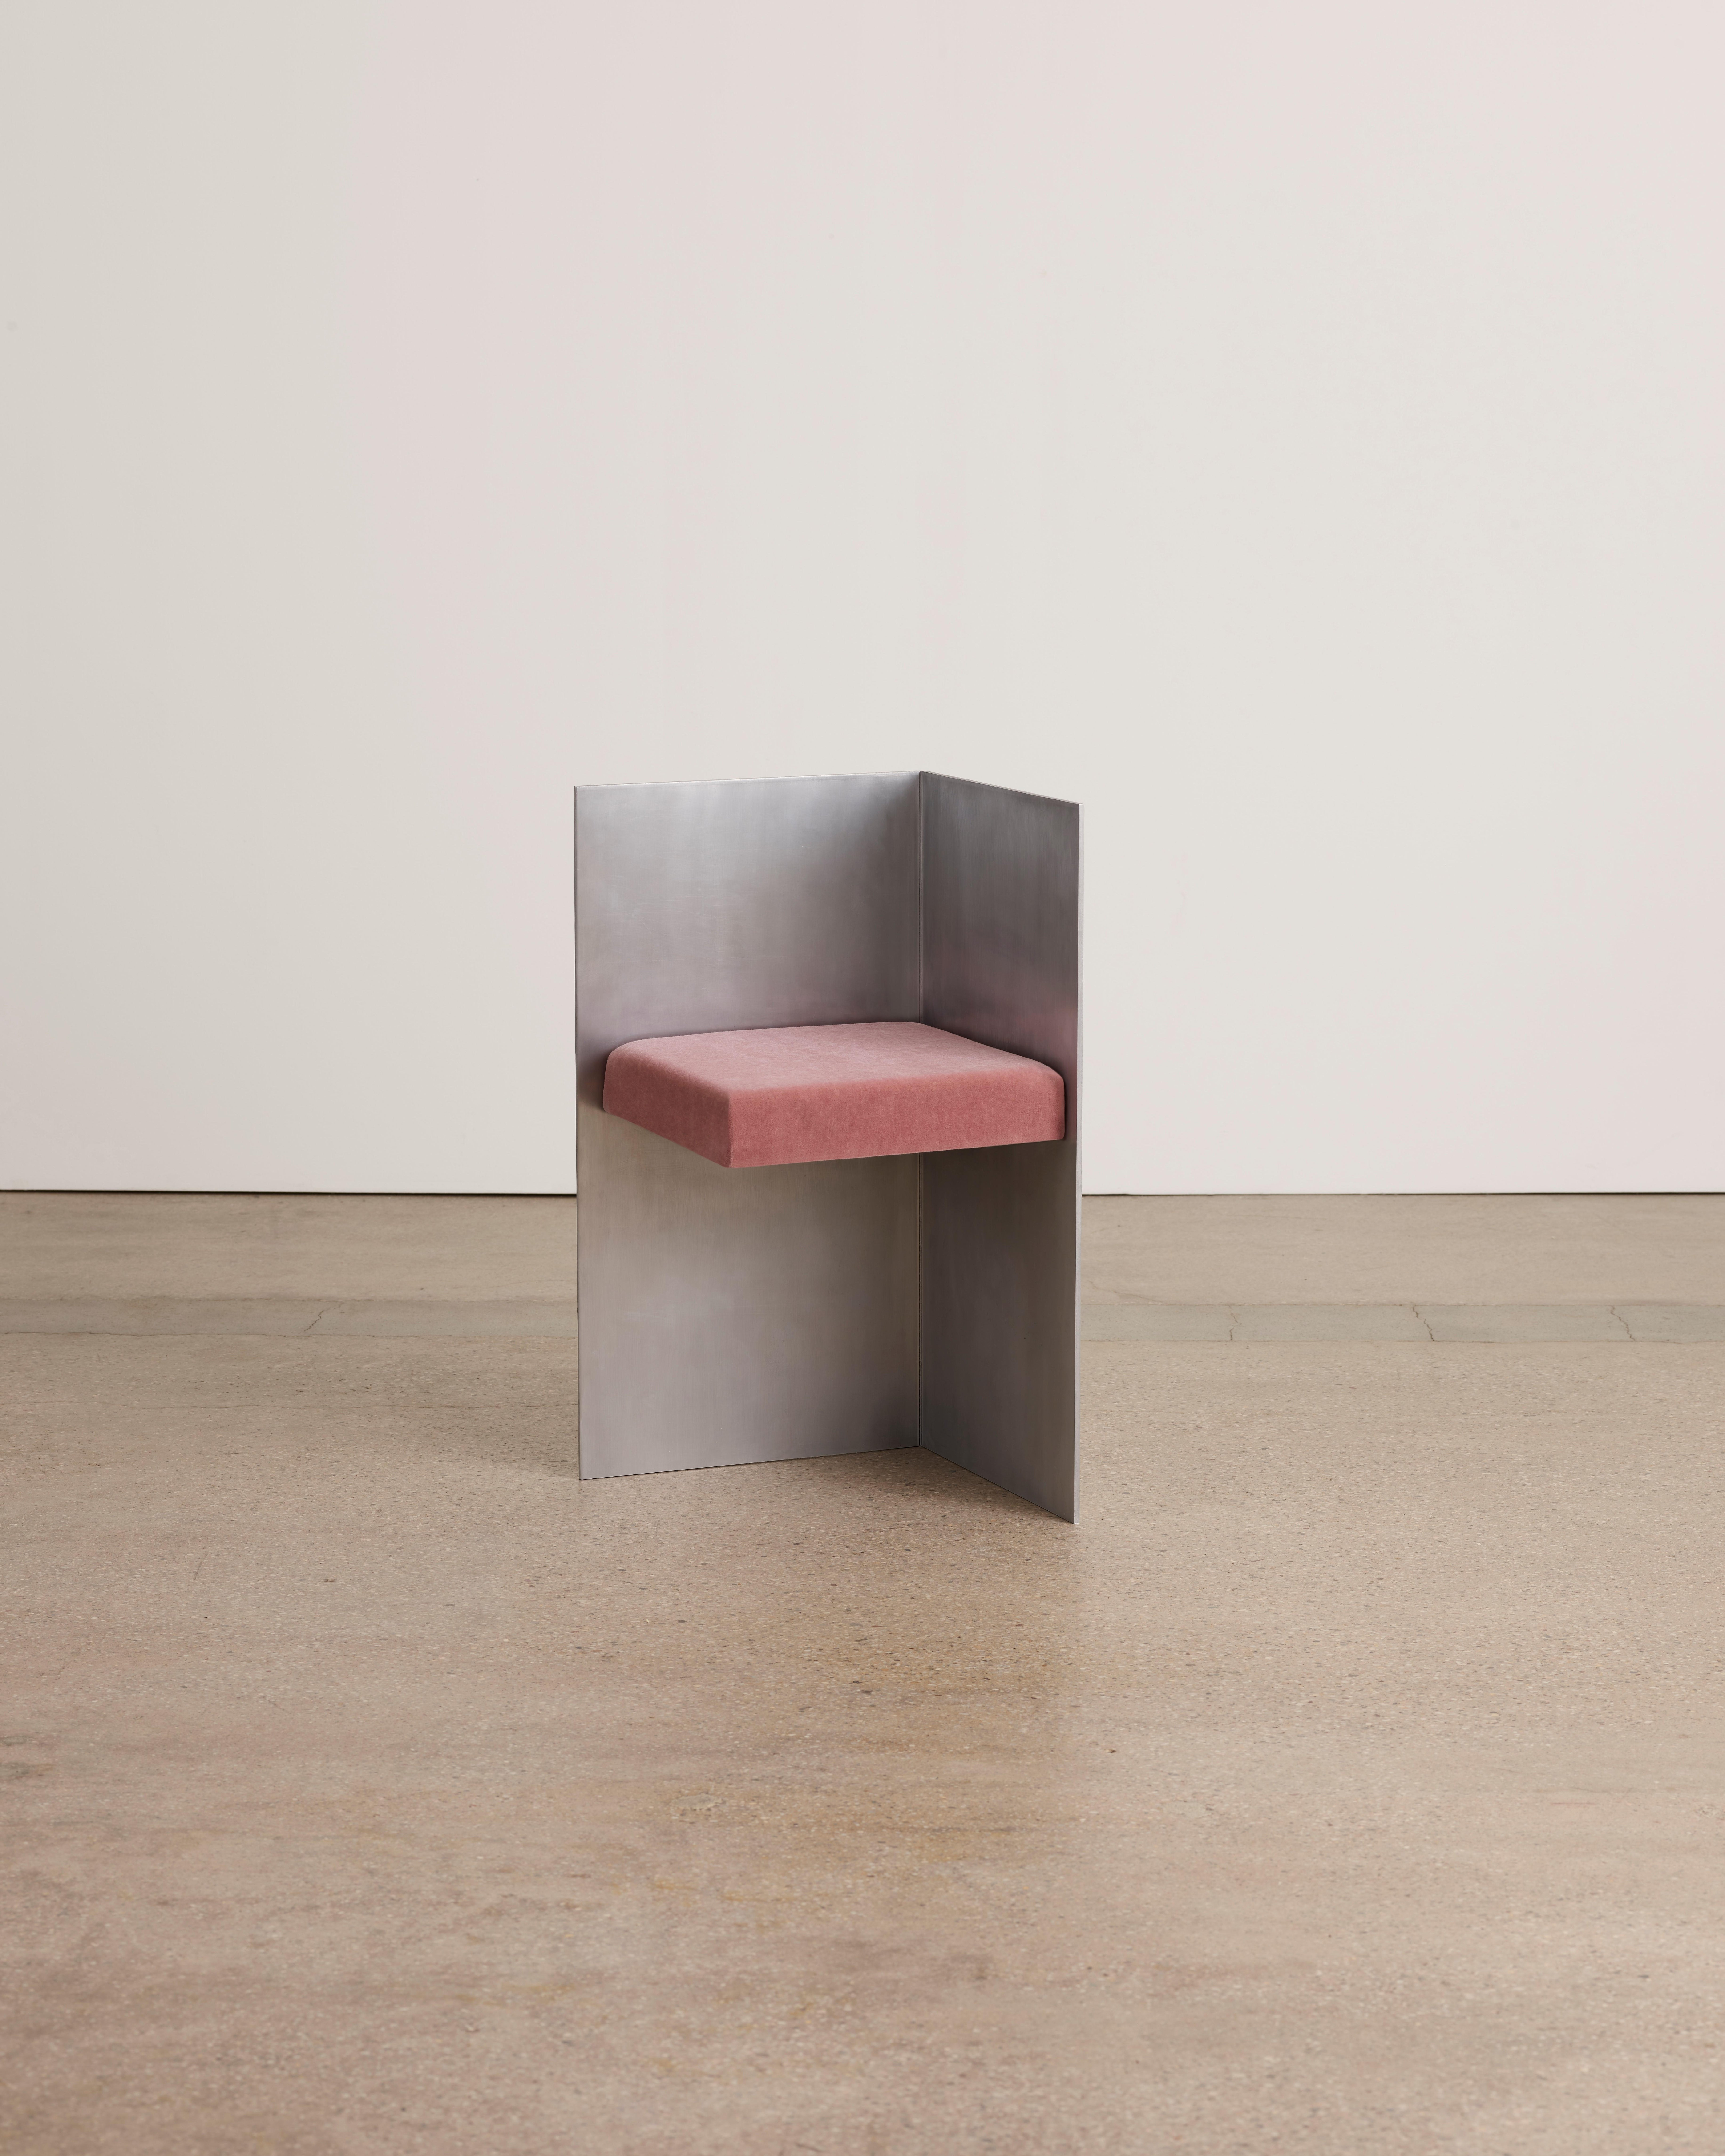 Chair C by Umberto Bellardi Ricci
Dimensions: W39.4 x D39.4 x H72.4 cm
Materials: Aluminium, brass angles, Mohair upholstery. 

Umberto Bellardi Ricci is an Italian sculptor and architect based in New York City, practicing across London, Mexico,